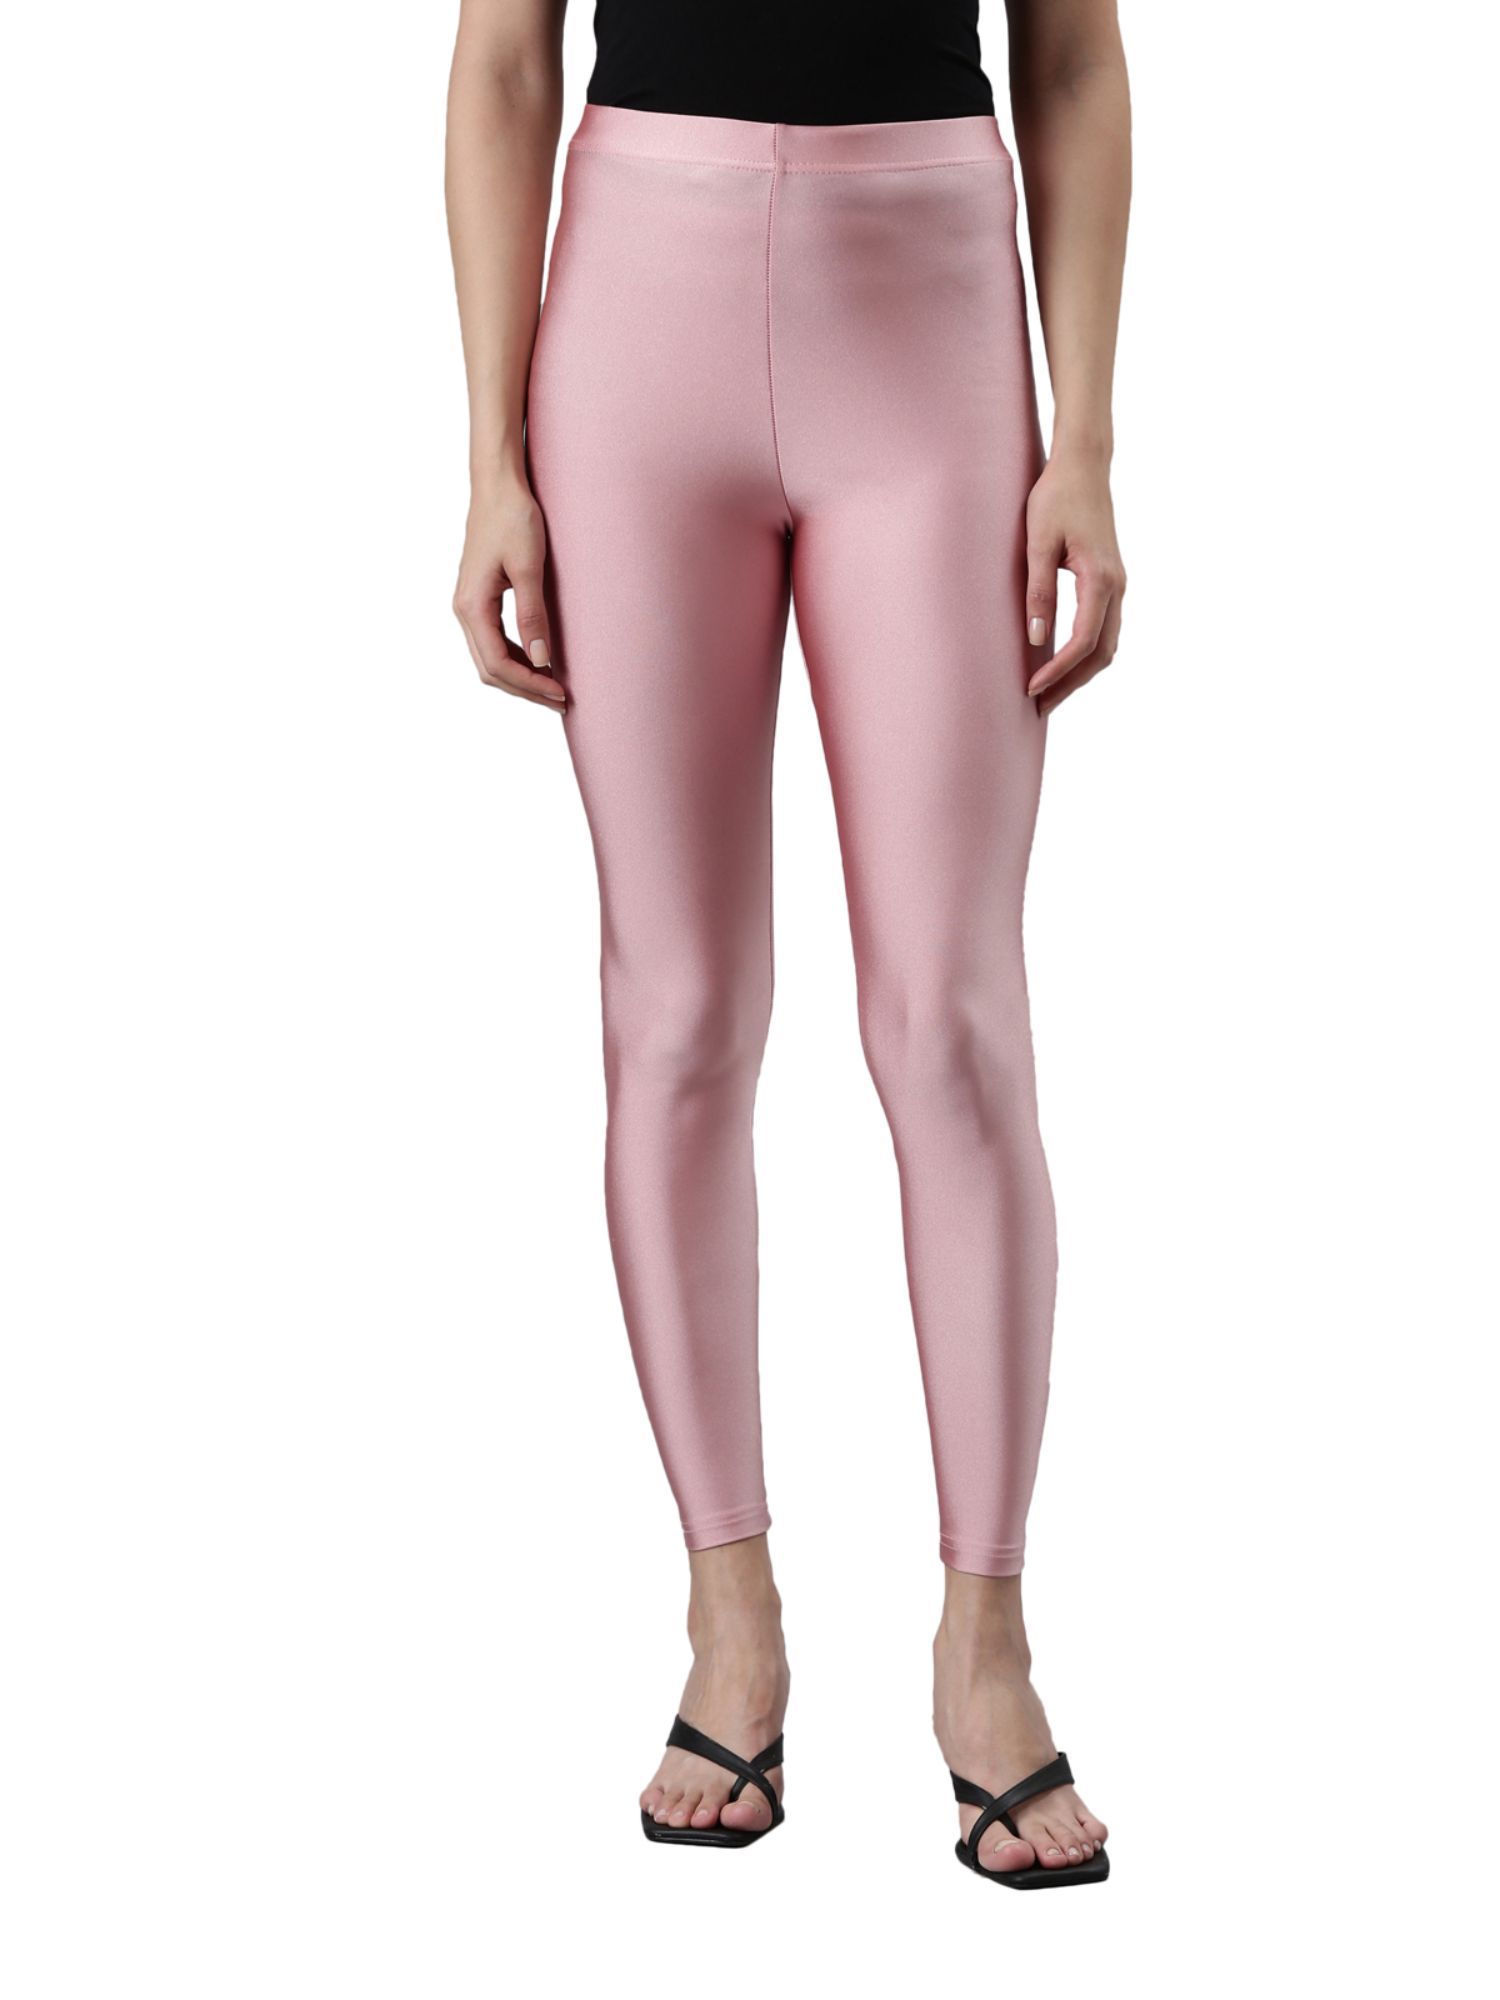 Plain Shimmery Skiny leggings at Rs.75/Piece in pune offer by